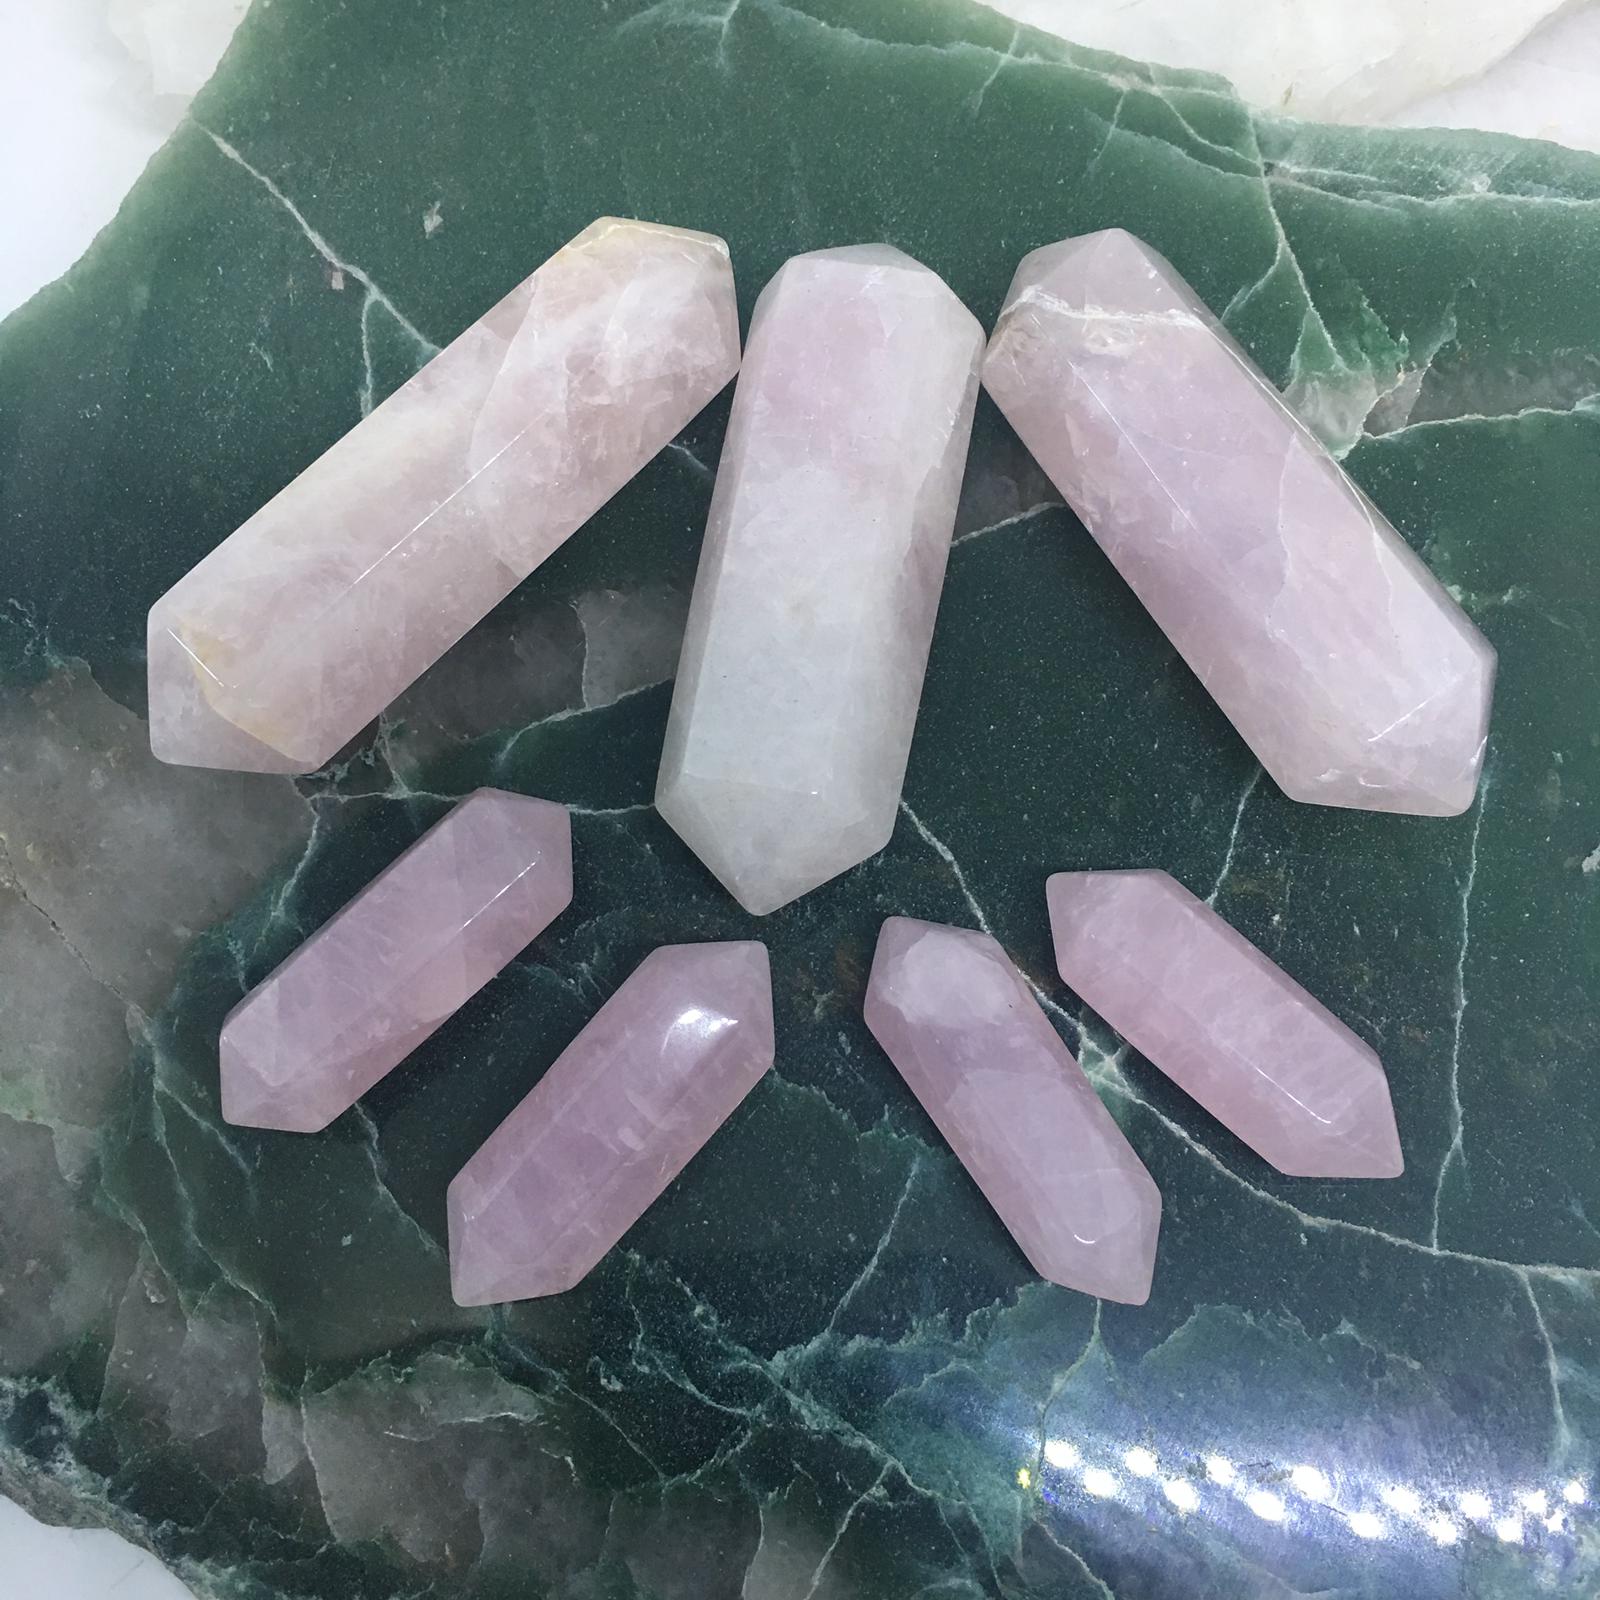 Stones from Uruguay - Rose Quartz Double Terminated Crystal Polished Point for Meditation or Healing